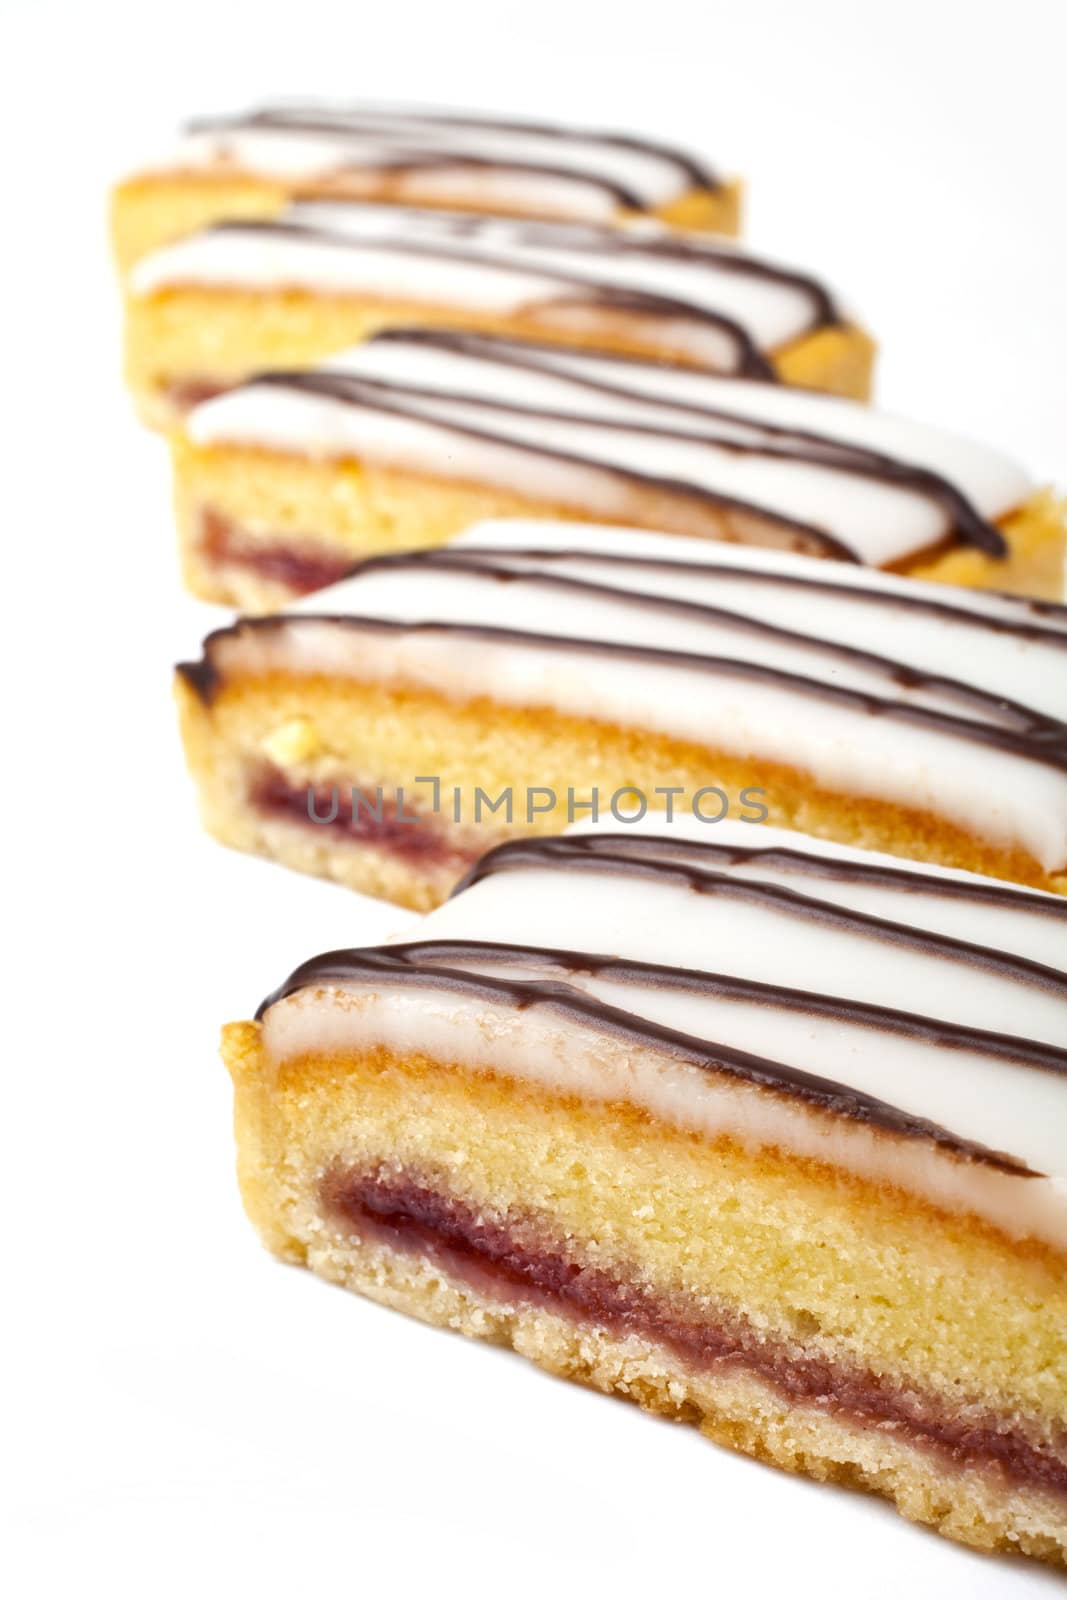 Cherry Bakewell Slices over a white background.